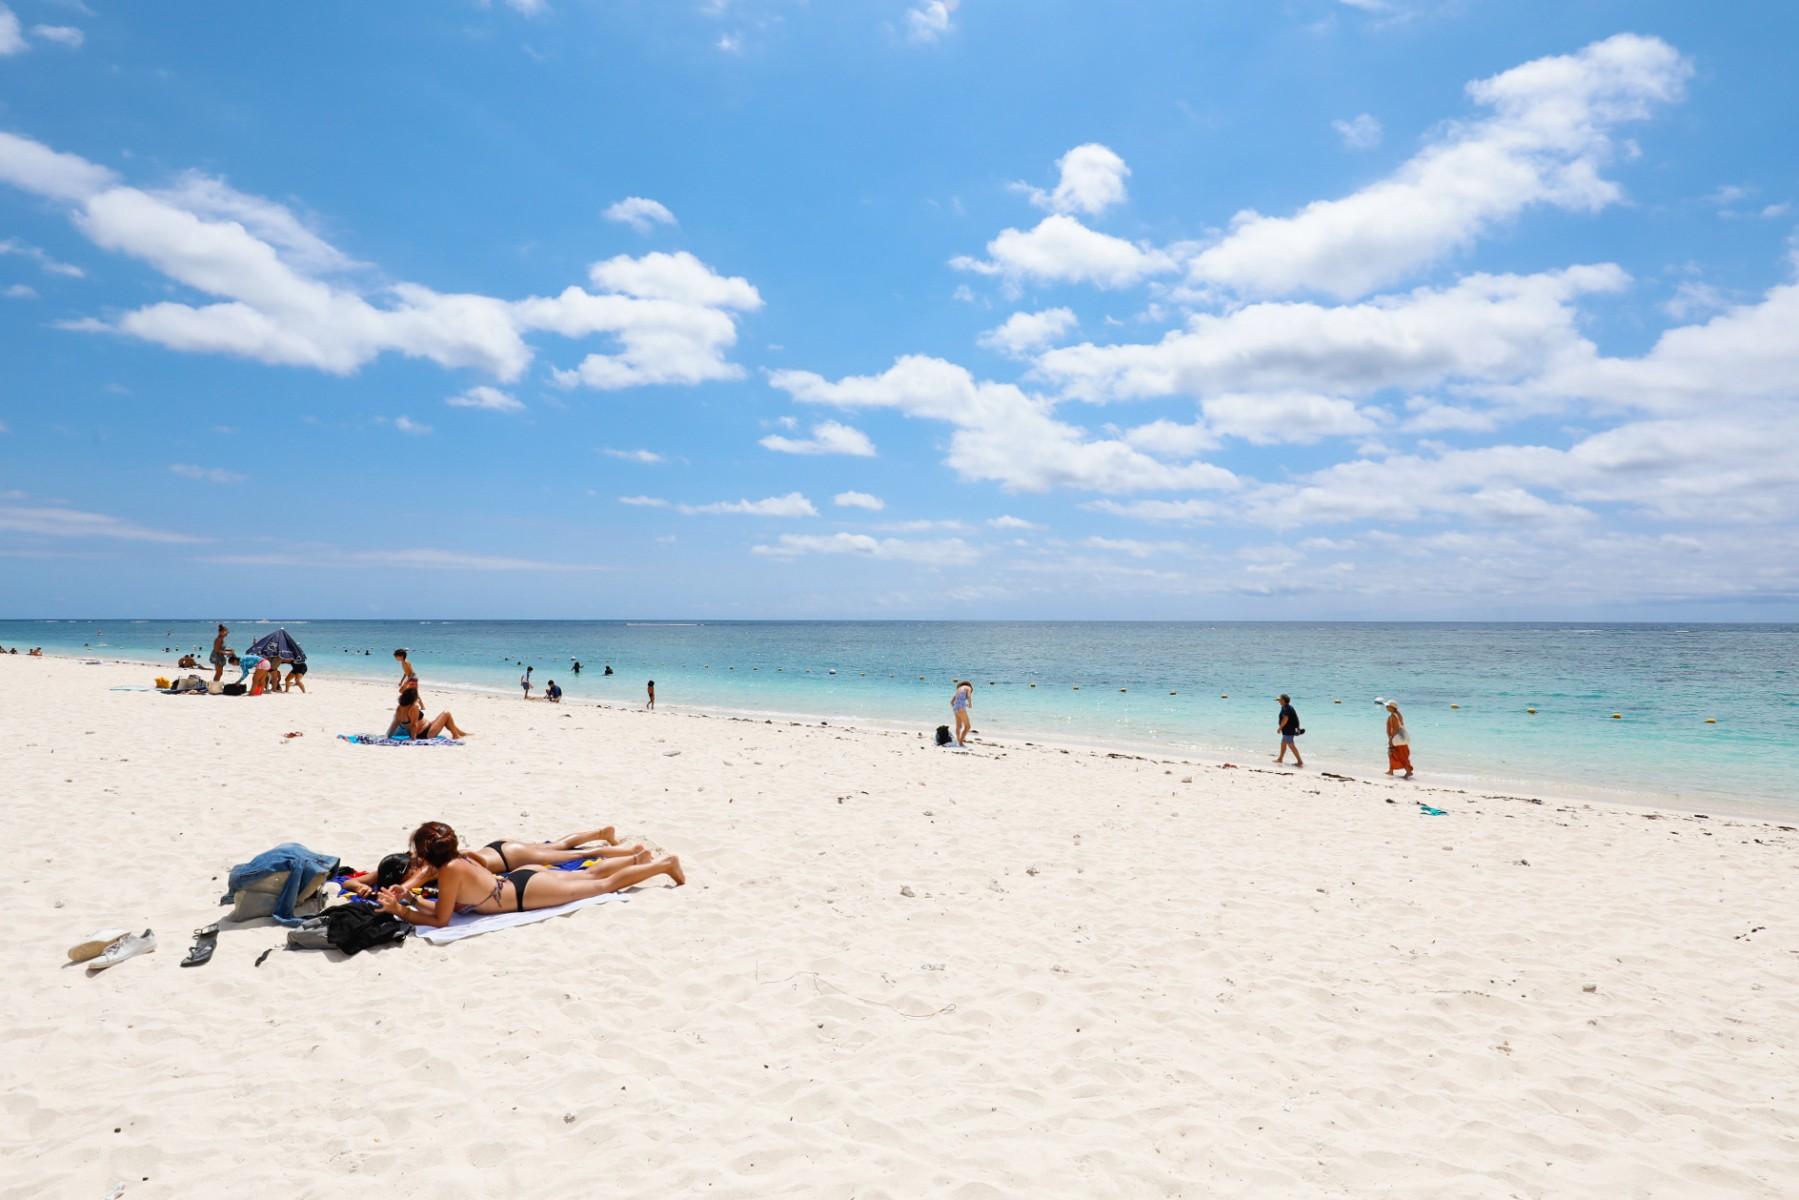 A general view of tourists on the Flic en Flac beach located on the western coast of Mauritius on Nov 3, 2021. Photo: AFP